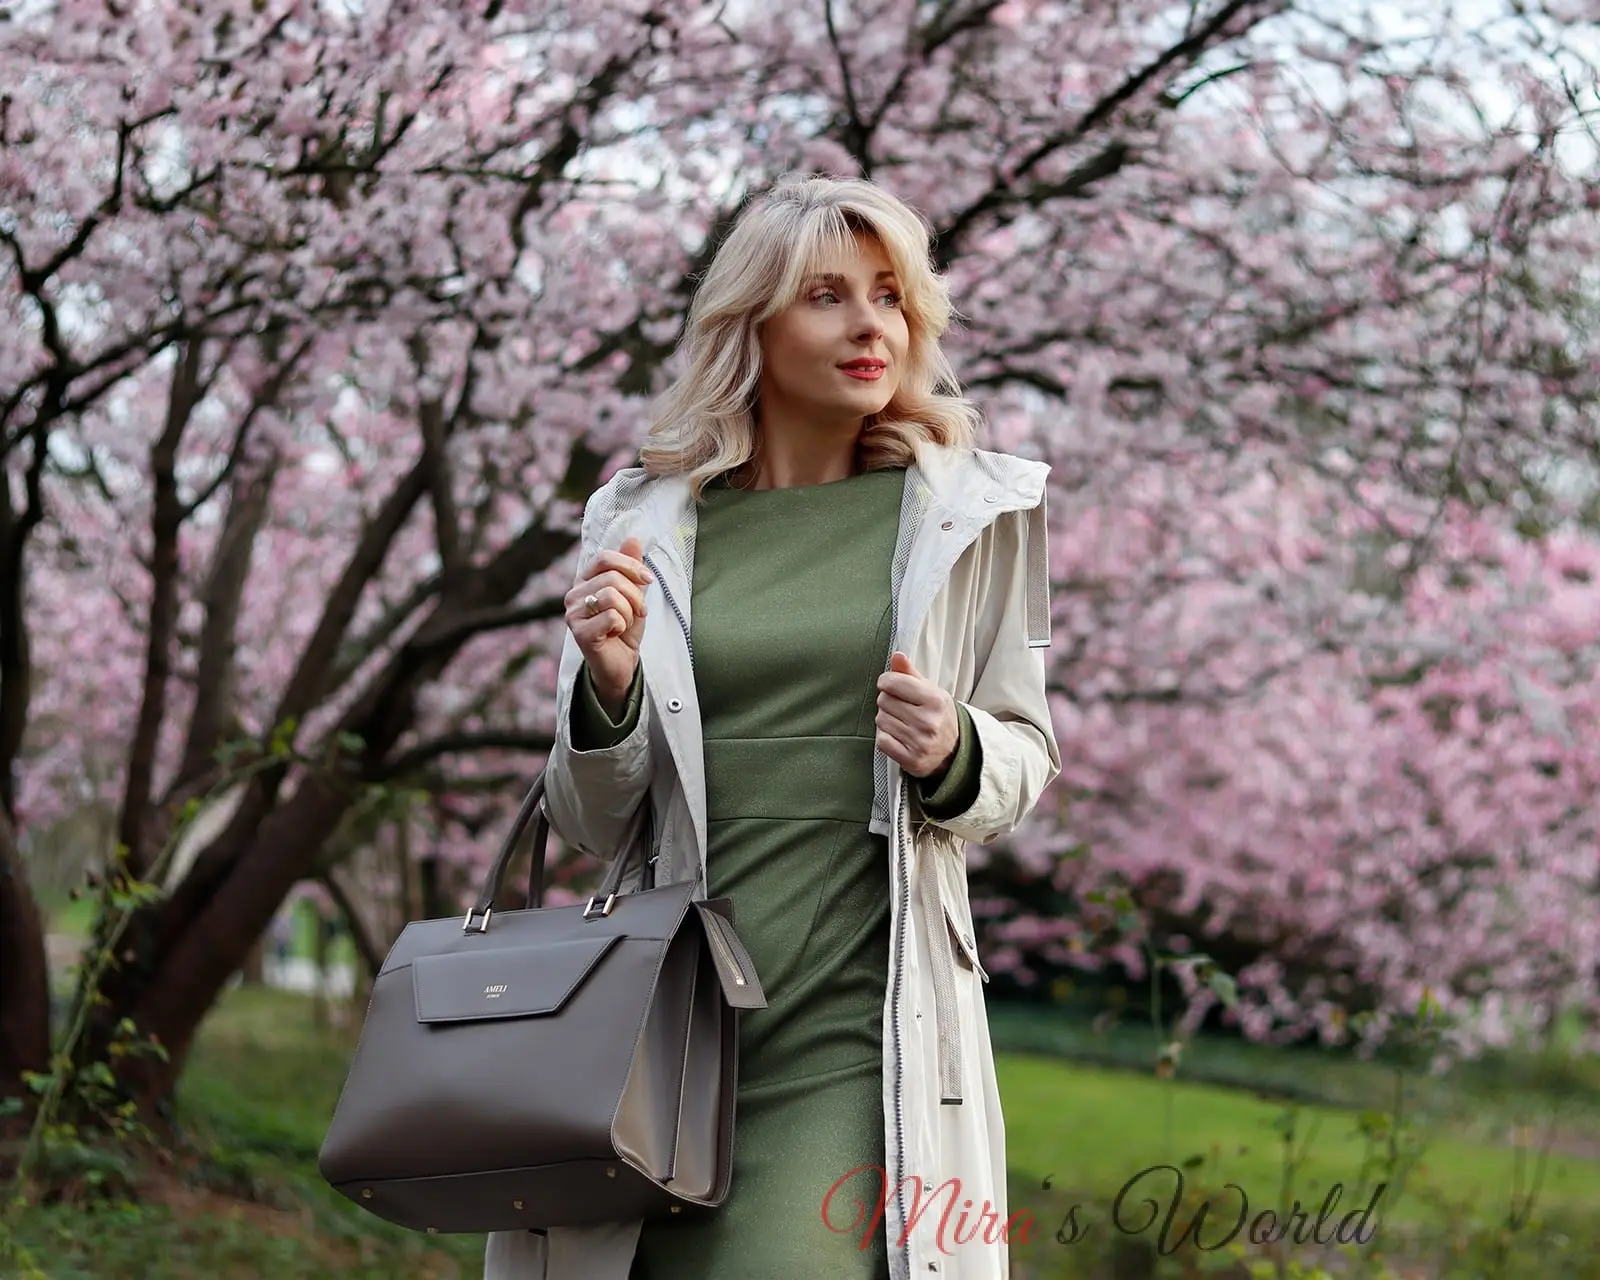 Woman with bag and pink blossoms.